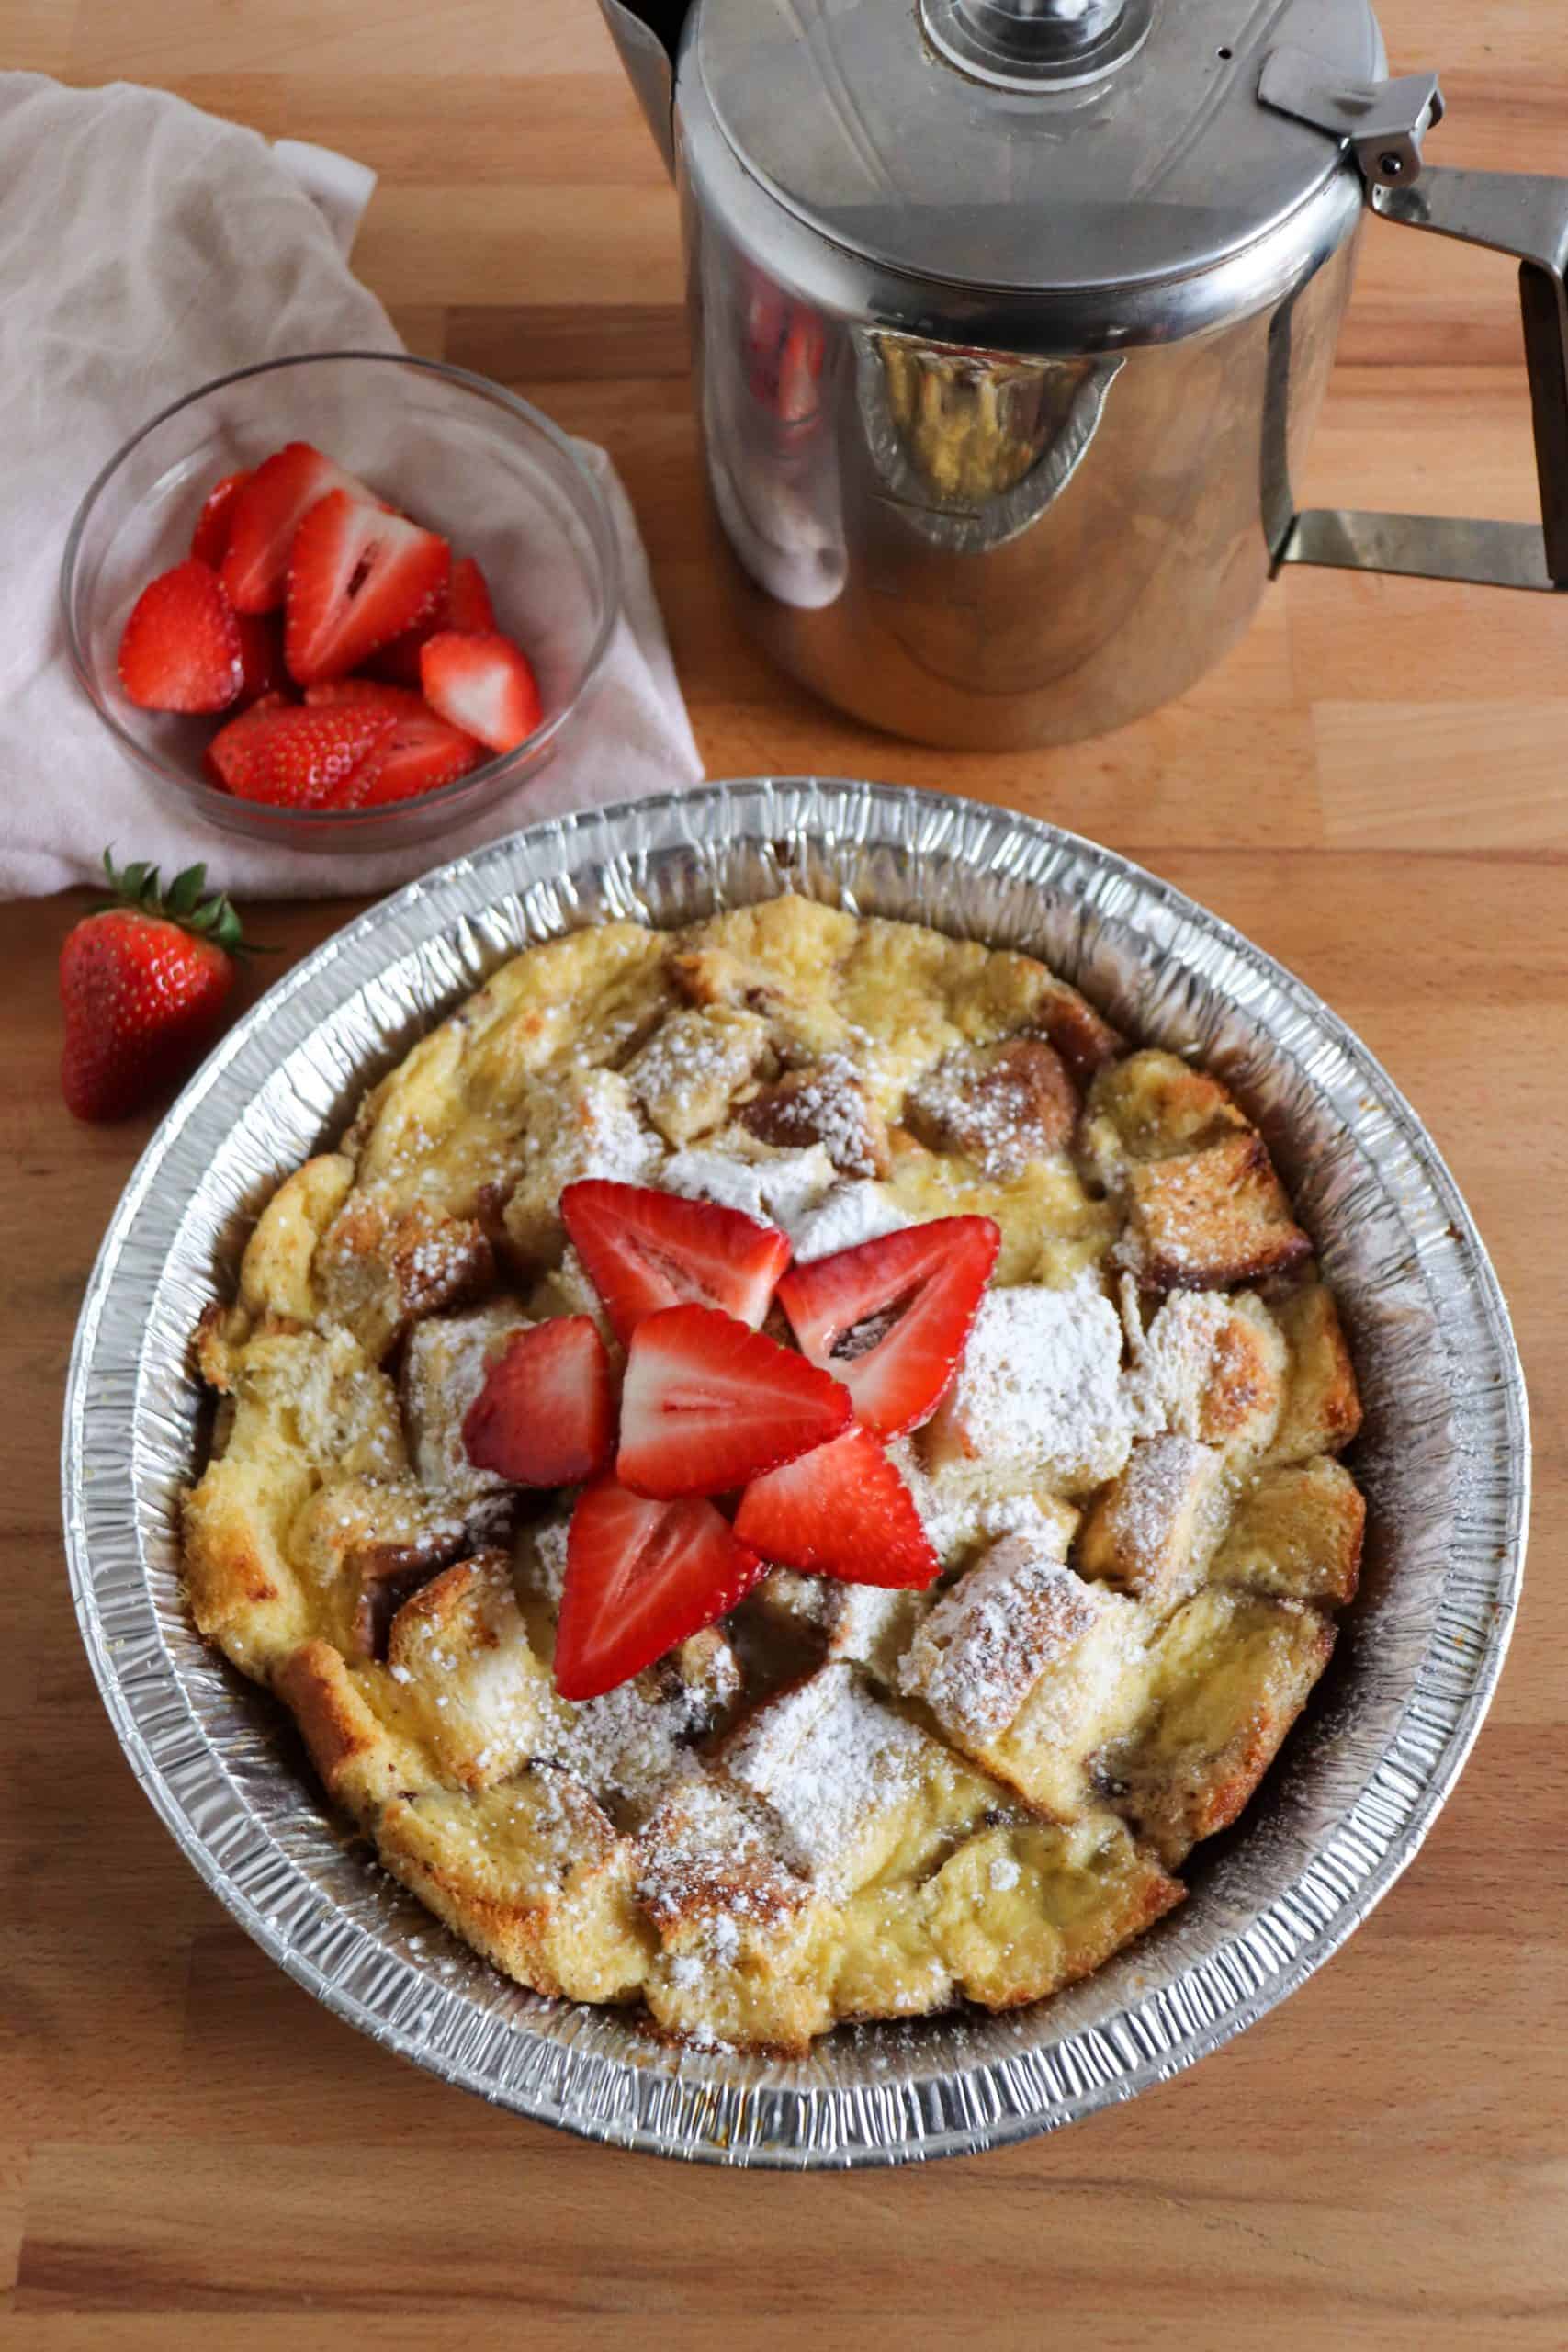 https://homemadeheather.com/wp-content/uploads/2021/03/foil-packet-french-toast-bake-1-9-scaled.jpg